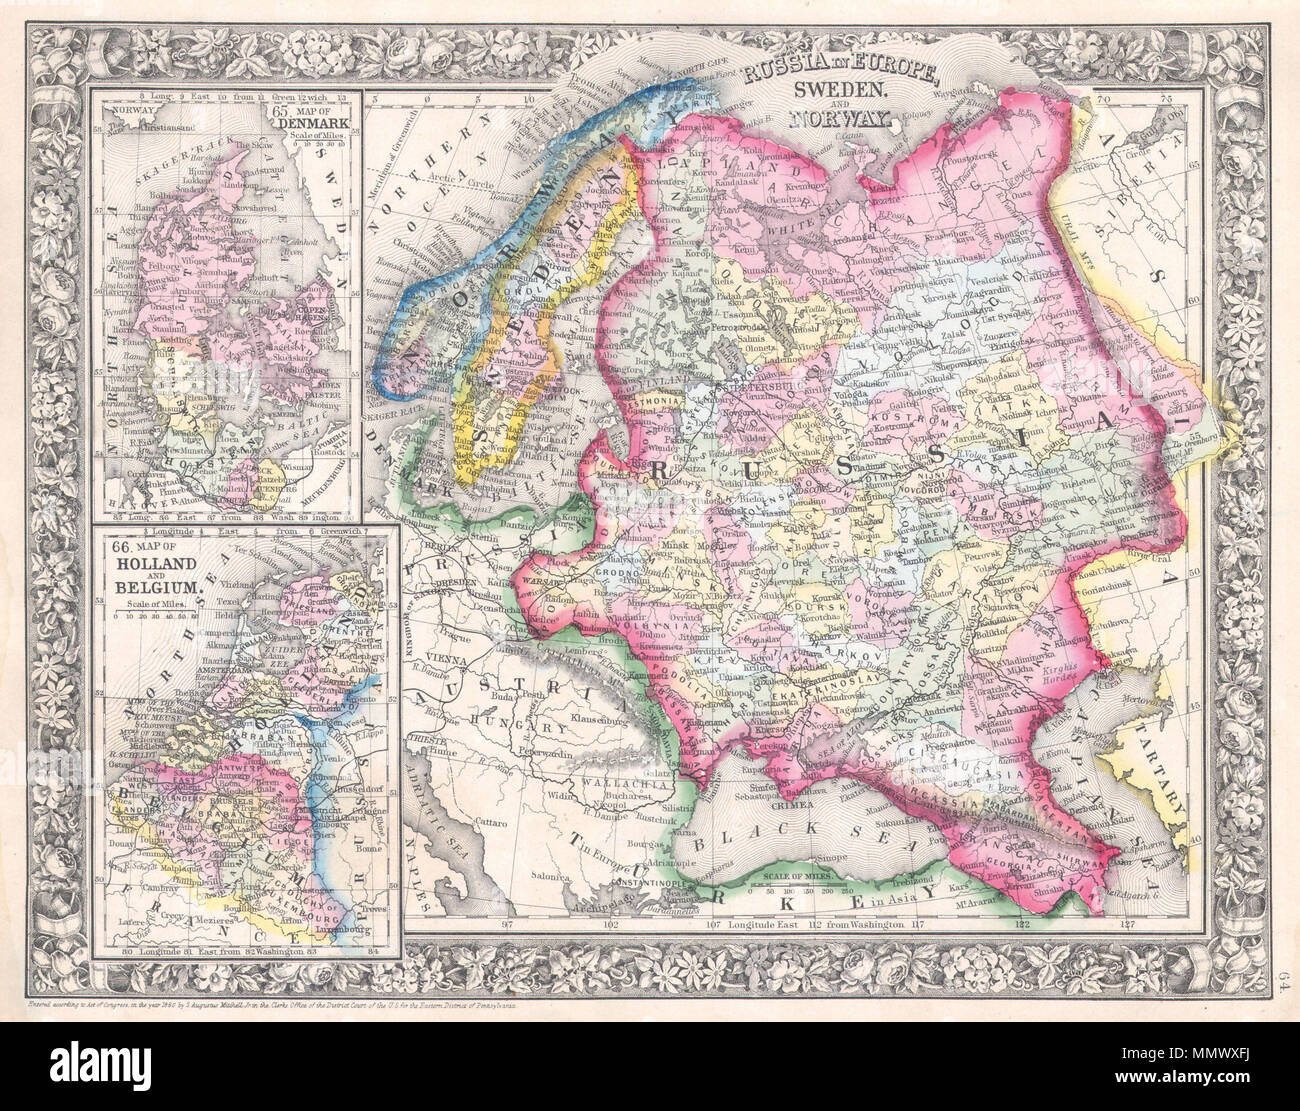 .  English: A beautiful example of S. A. Mitchell Jr.’s 1864 map of Russia, Norway, Sweden, Holland Belgium and Denmark. Maps of Denmark, Holland and Belgium relegated in insets on the left hand side of the map. Denotes both political and geographical details. Extends as far south and west as the boot of Italy and as far east as the Caspian Sea and the Gulf of Obi. One of the most attractive American atlas maps of this region to appear in the mid 19th century. Features the floral border typical of Mitchell maps from the 1860-65 period. Prepared by S.A. Mitchell for inclusion as plate no. 64 in Stock Photo